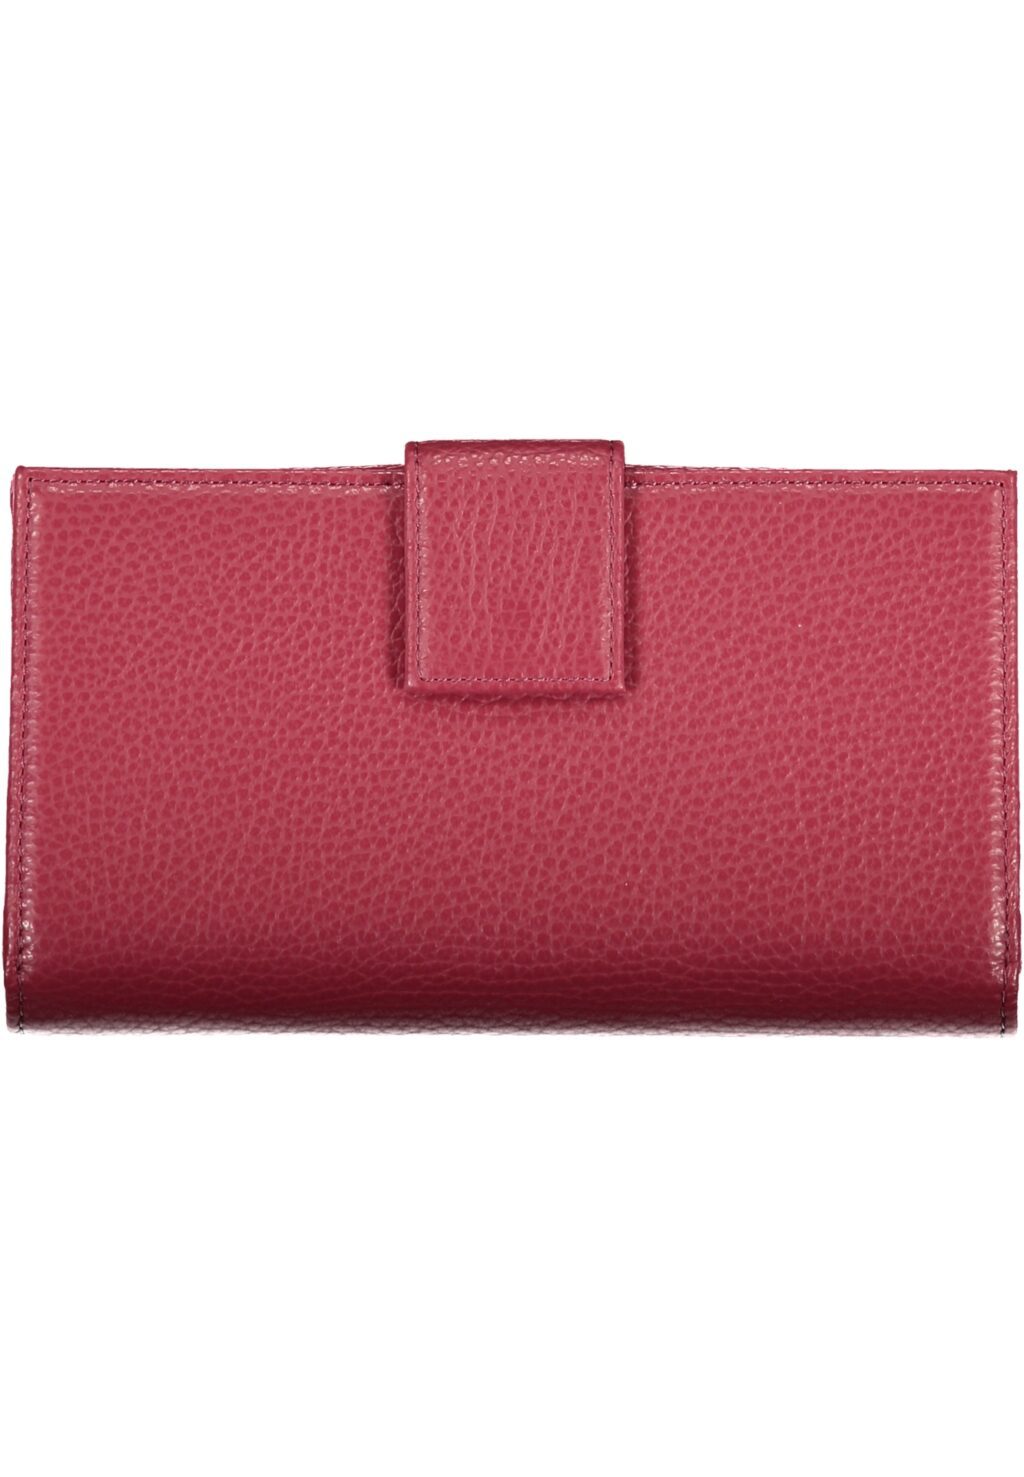 COCCINELLE WOMEN'S WALLET RED E2MW5118501_ROR77